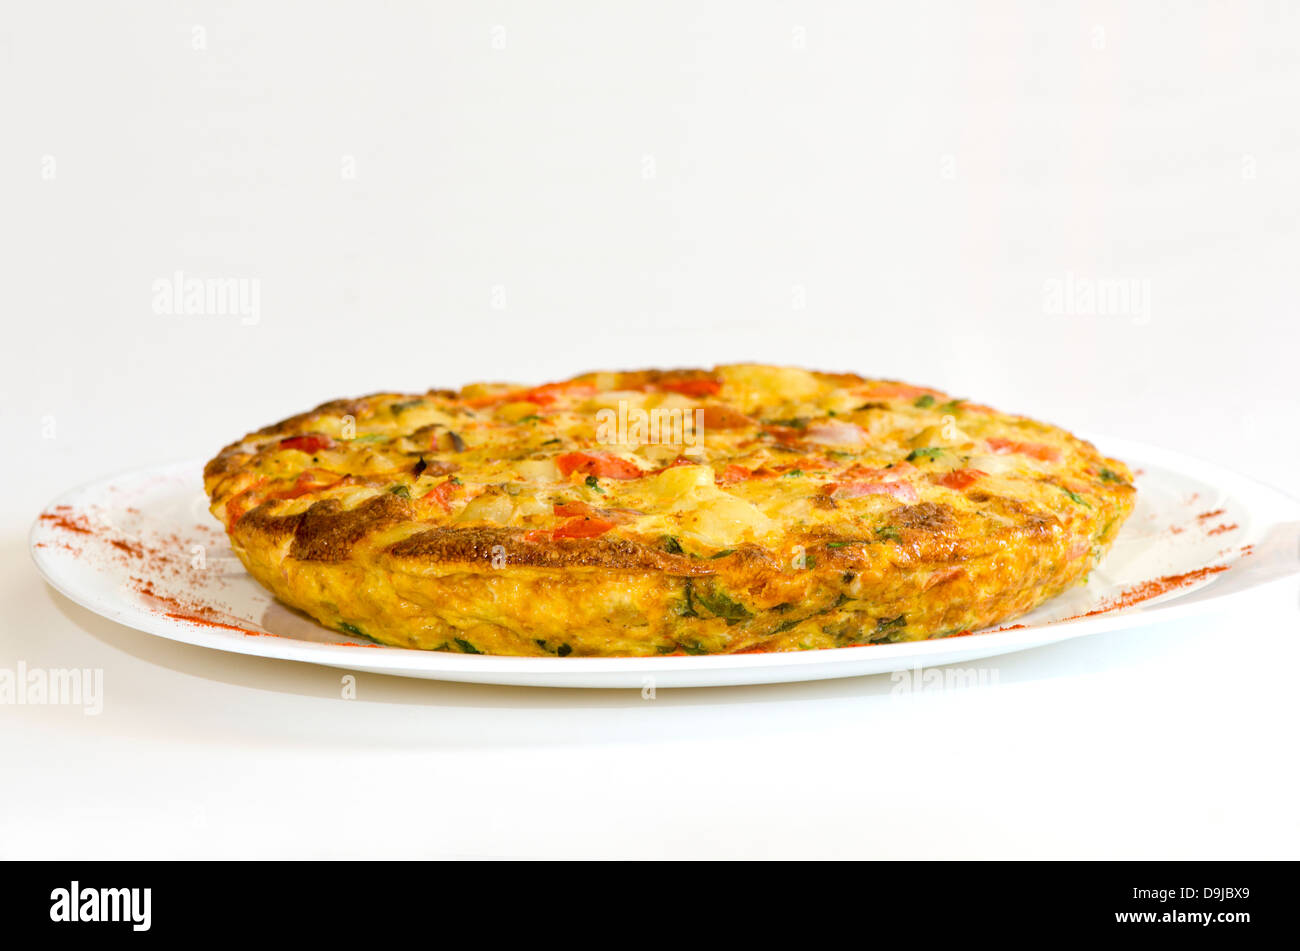 Spanish Omelette on a white plate. Andalusia, Spain. Stock Photo